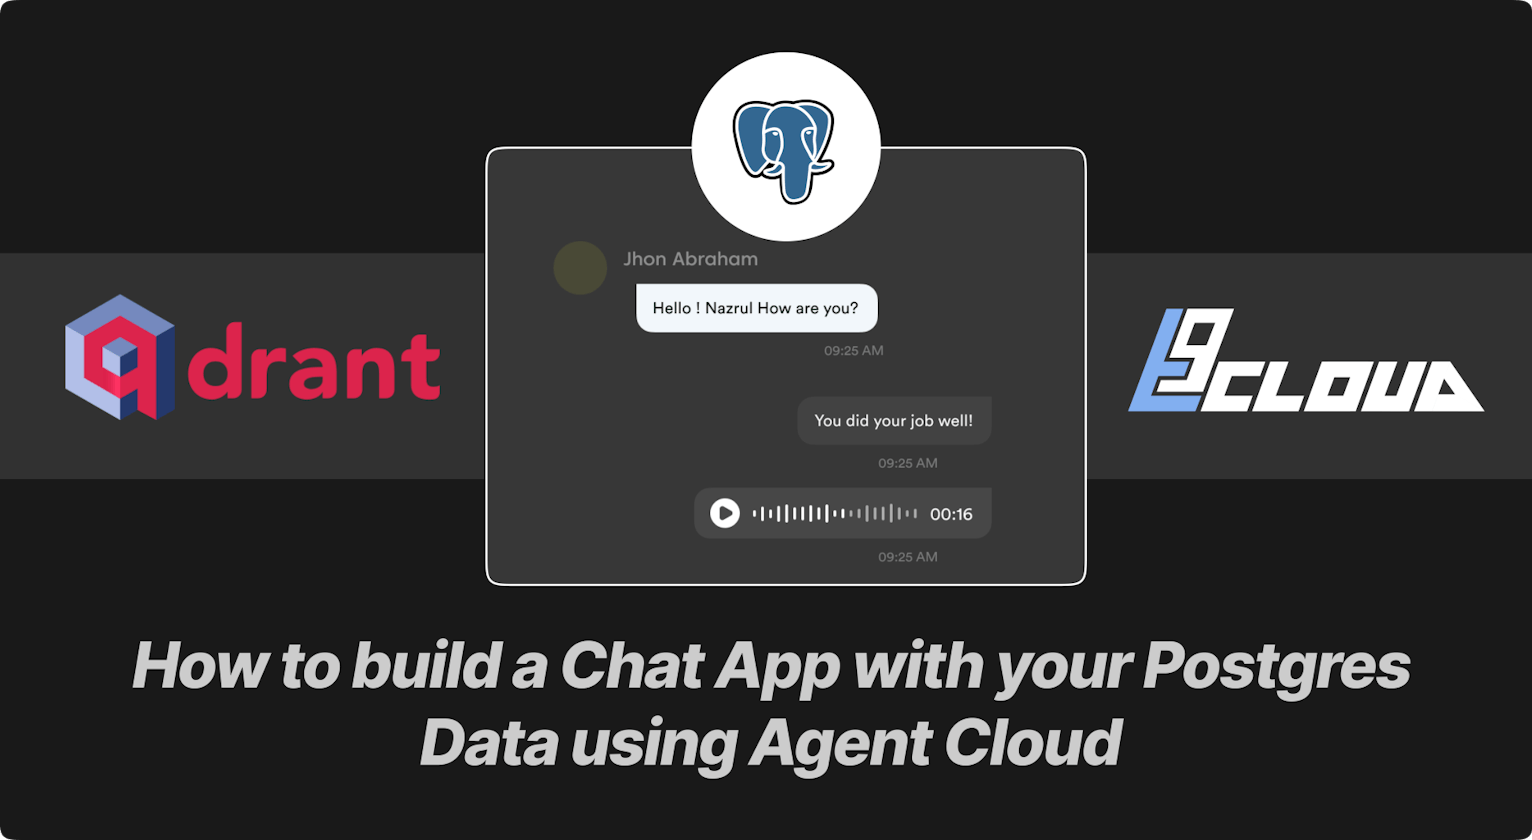 How to Build a Chat App with Your Postgres Data using Agent Cloud